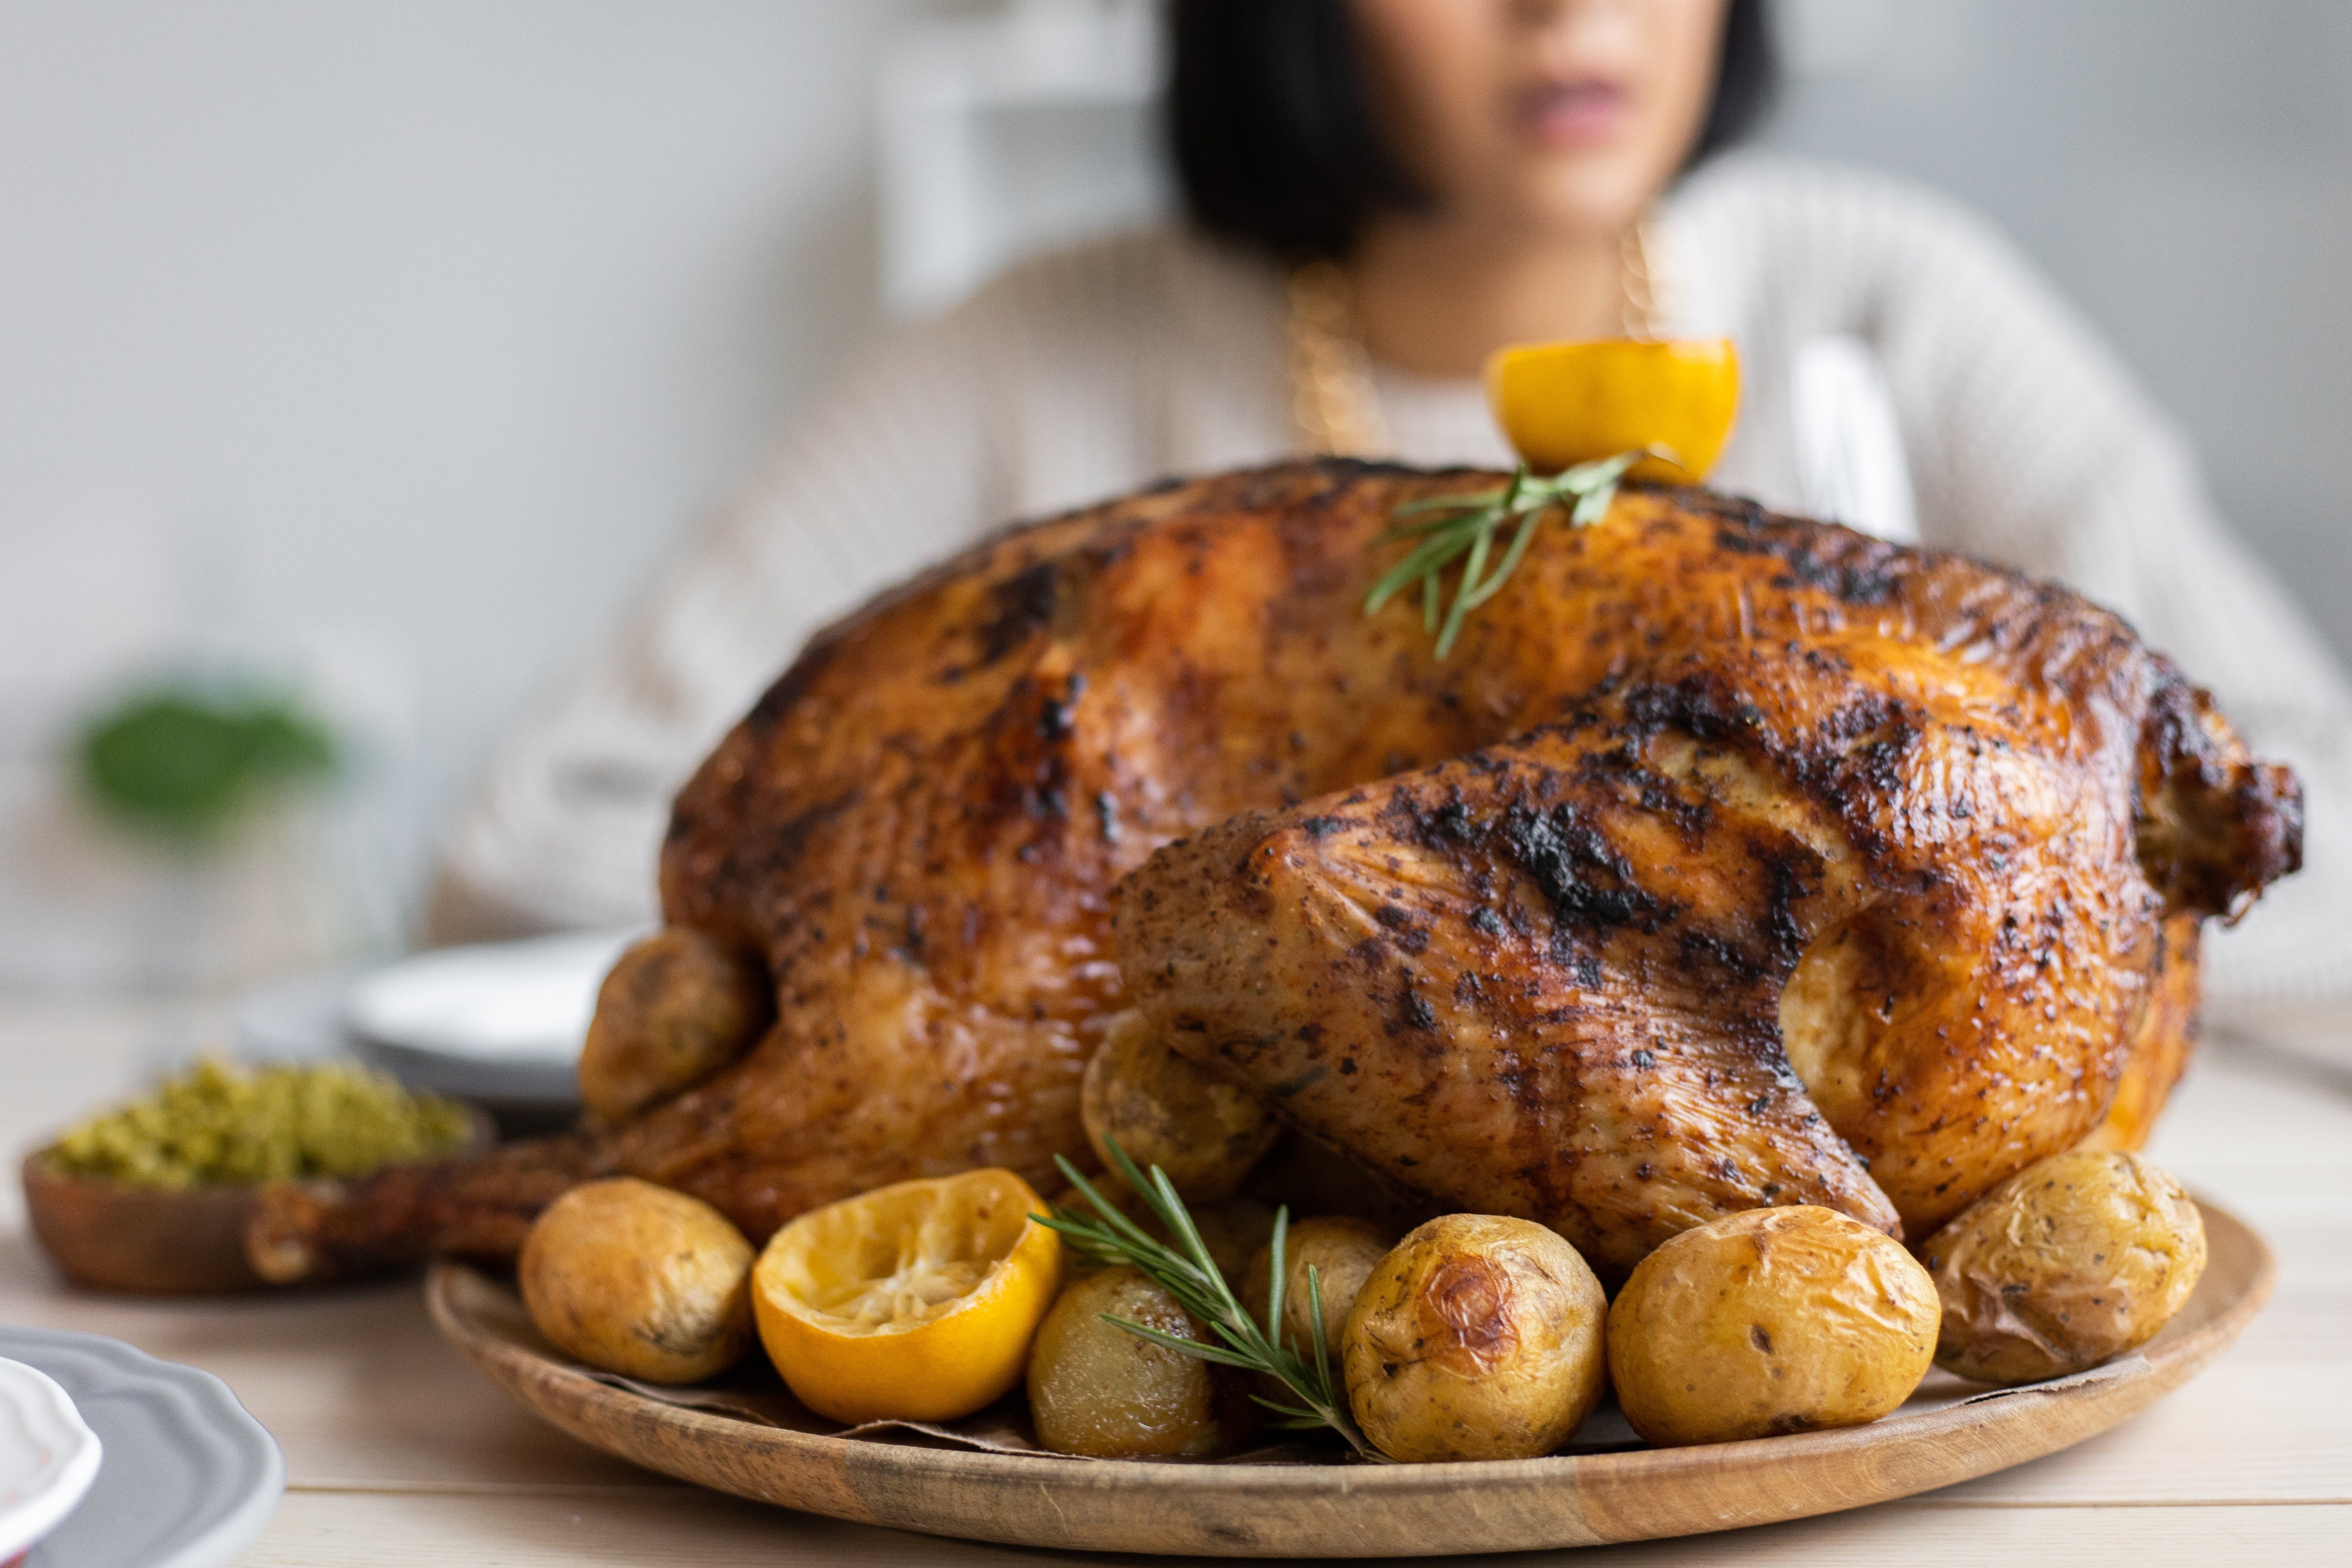 The husband claimed he was done with his wife when she threw his Thanksgiving turkey in the trashcan | Source: Pexels